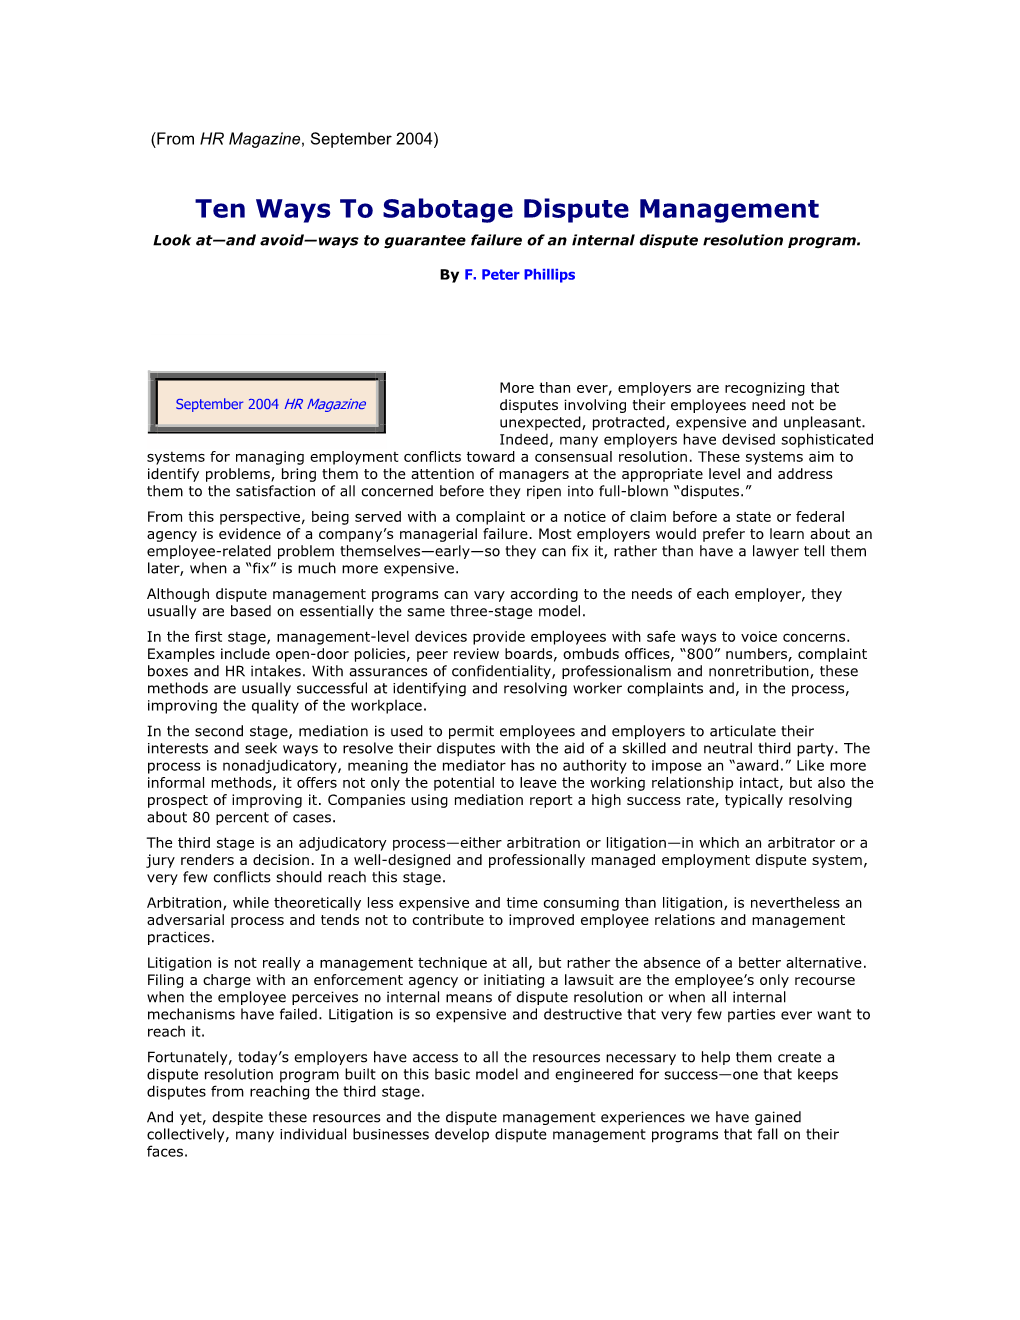 Ten Ways to Sabotage Dispute Management Look At—And Avoid—Ways to Guarantee Failure of an Internal Dispute Resolution Program